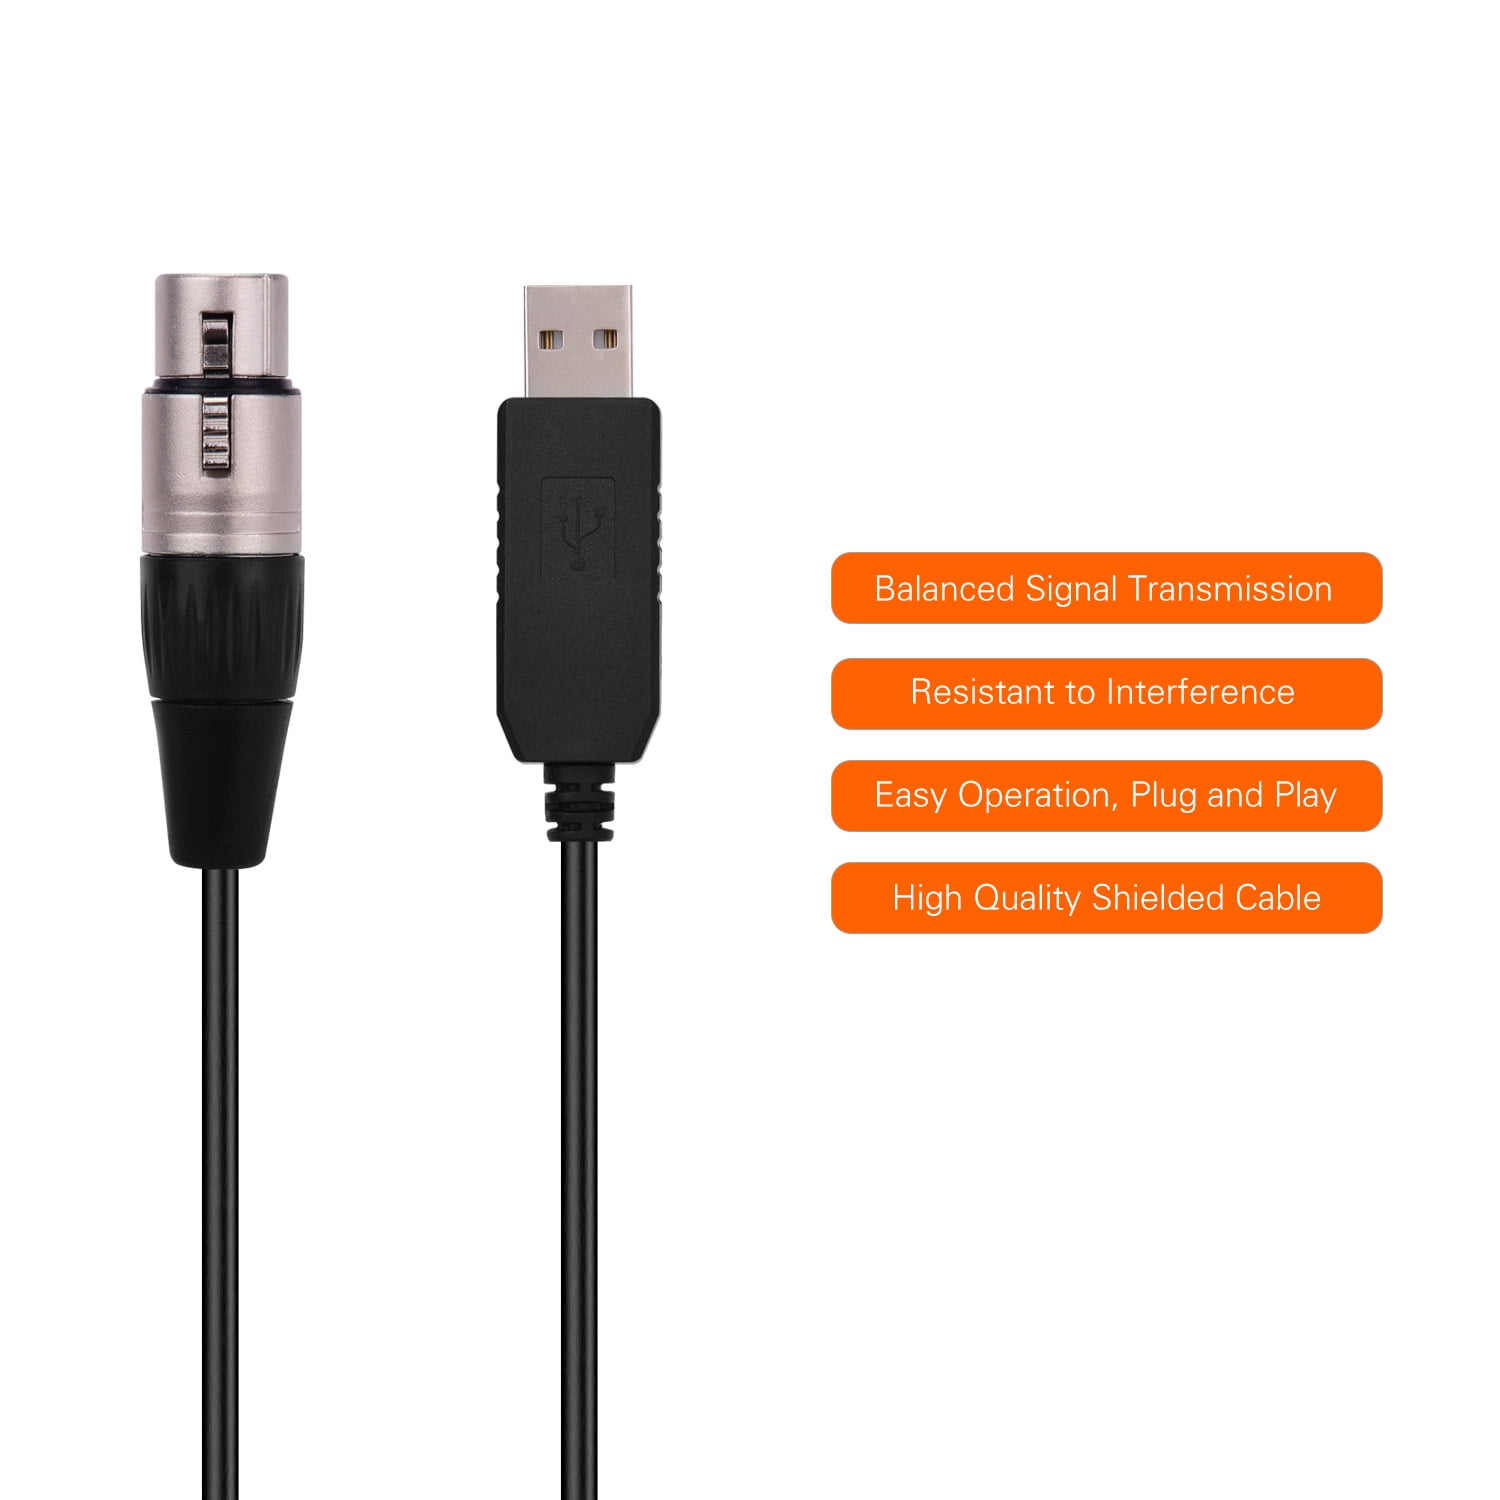 JJmooer RS485 DMX512 Converter Cable USB to 3Pin XLR Female Interface Computer Connecting Stage Lighting Devices LED Control Cable Compatible with Freestyler Download Black Plug 5m Length